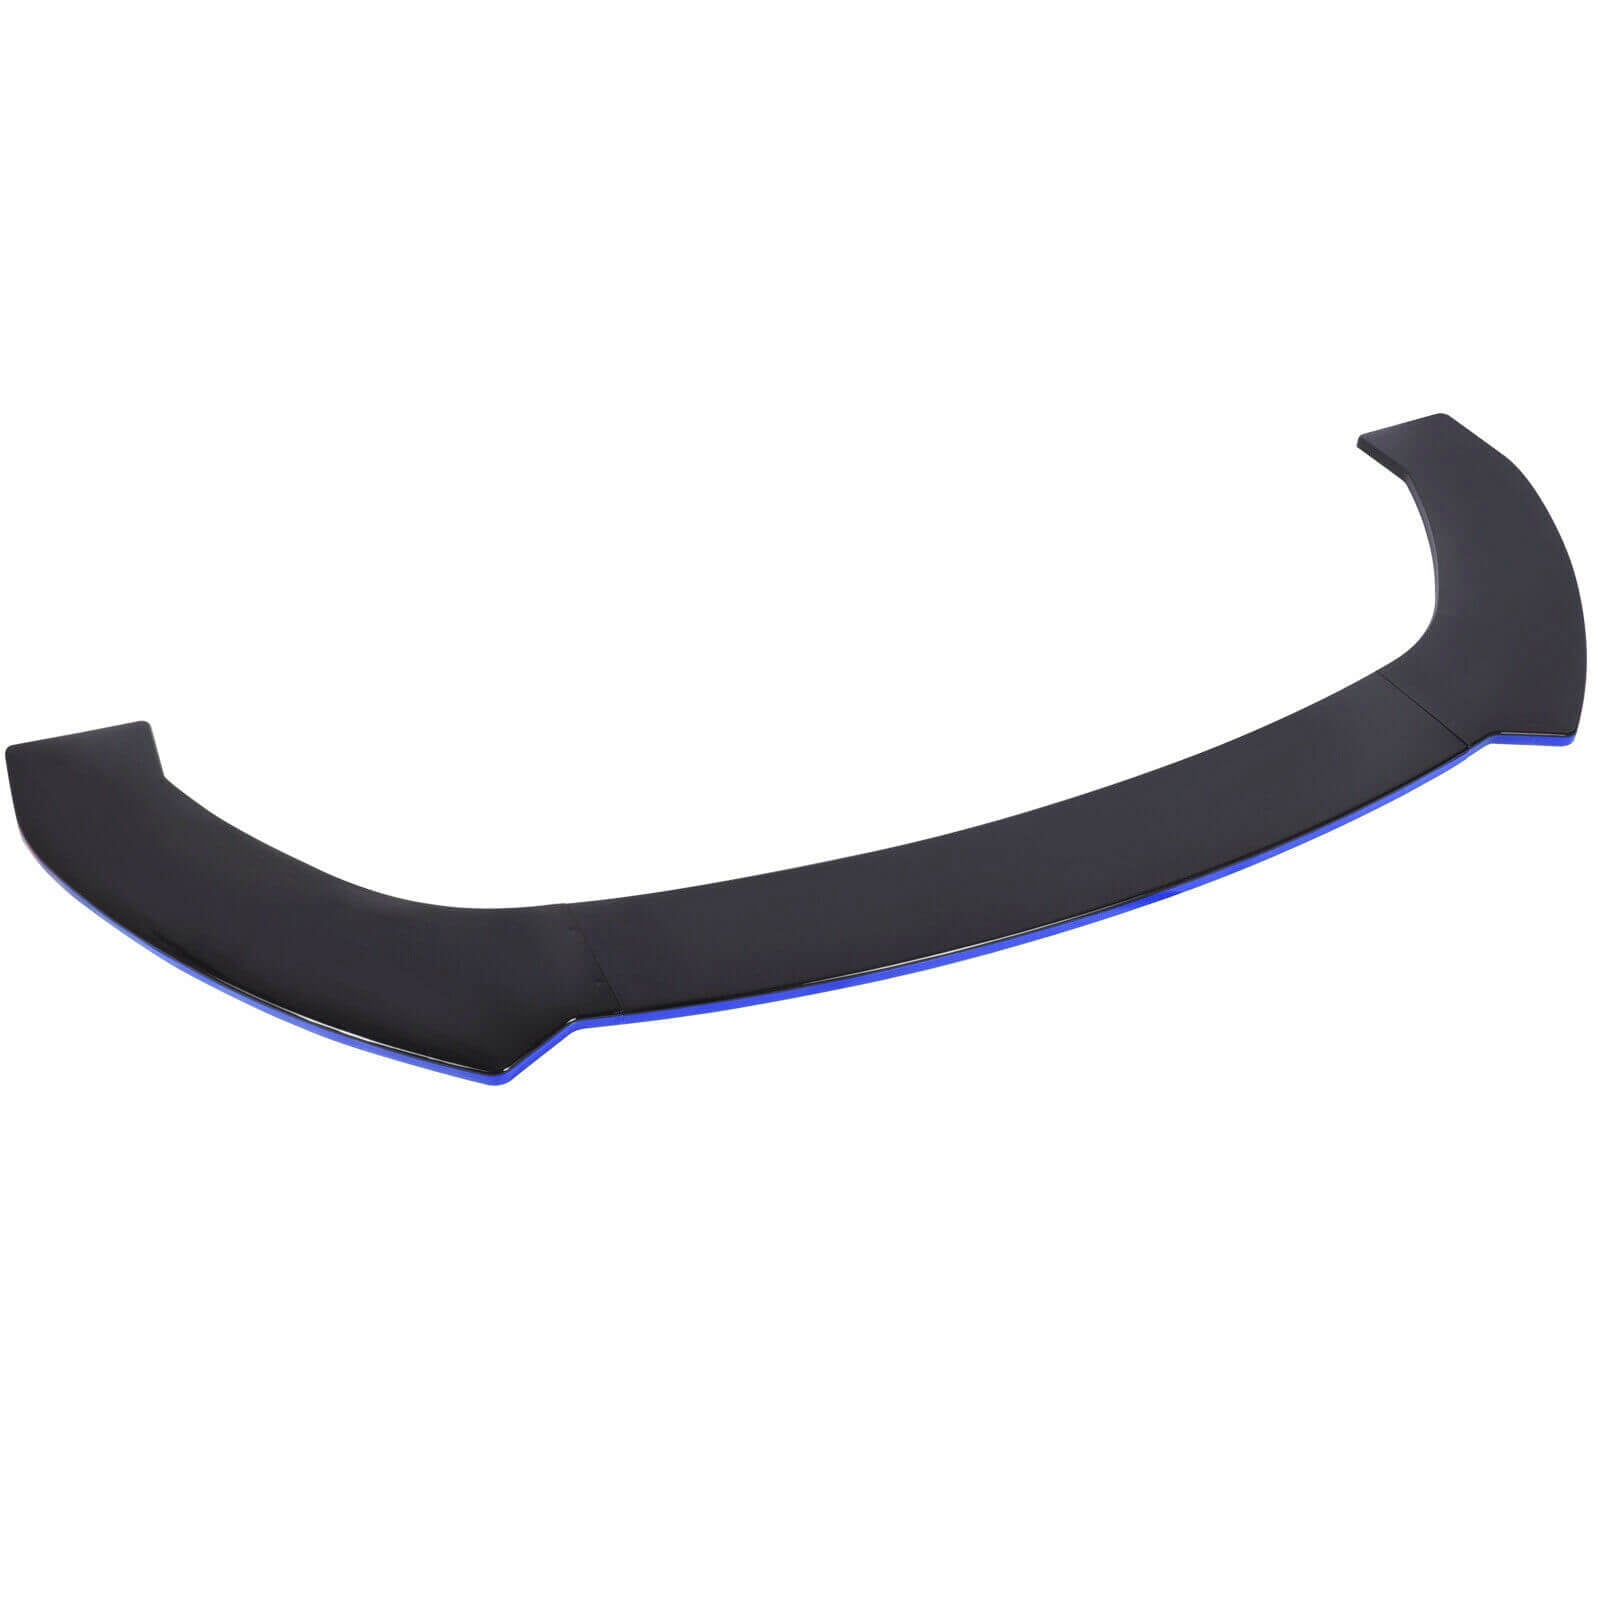 Blue of Universal Front Bumper Lip Trim to Fit